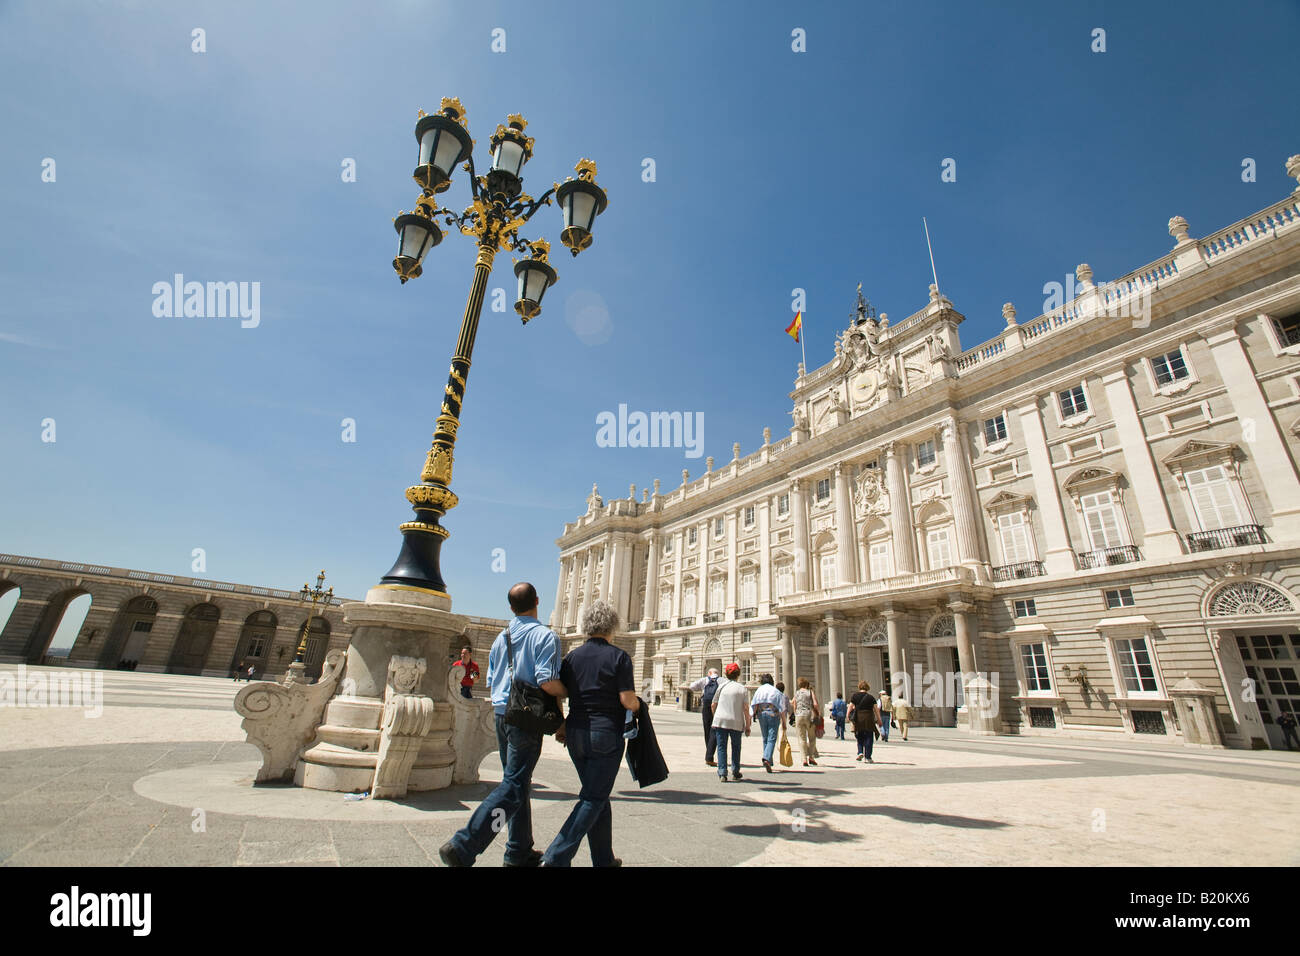 SPAIN Madrid People walking across square outside Royal Palace built by King Philip V in the 18th century wrought iron lampstand Stock Photo